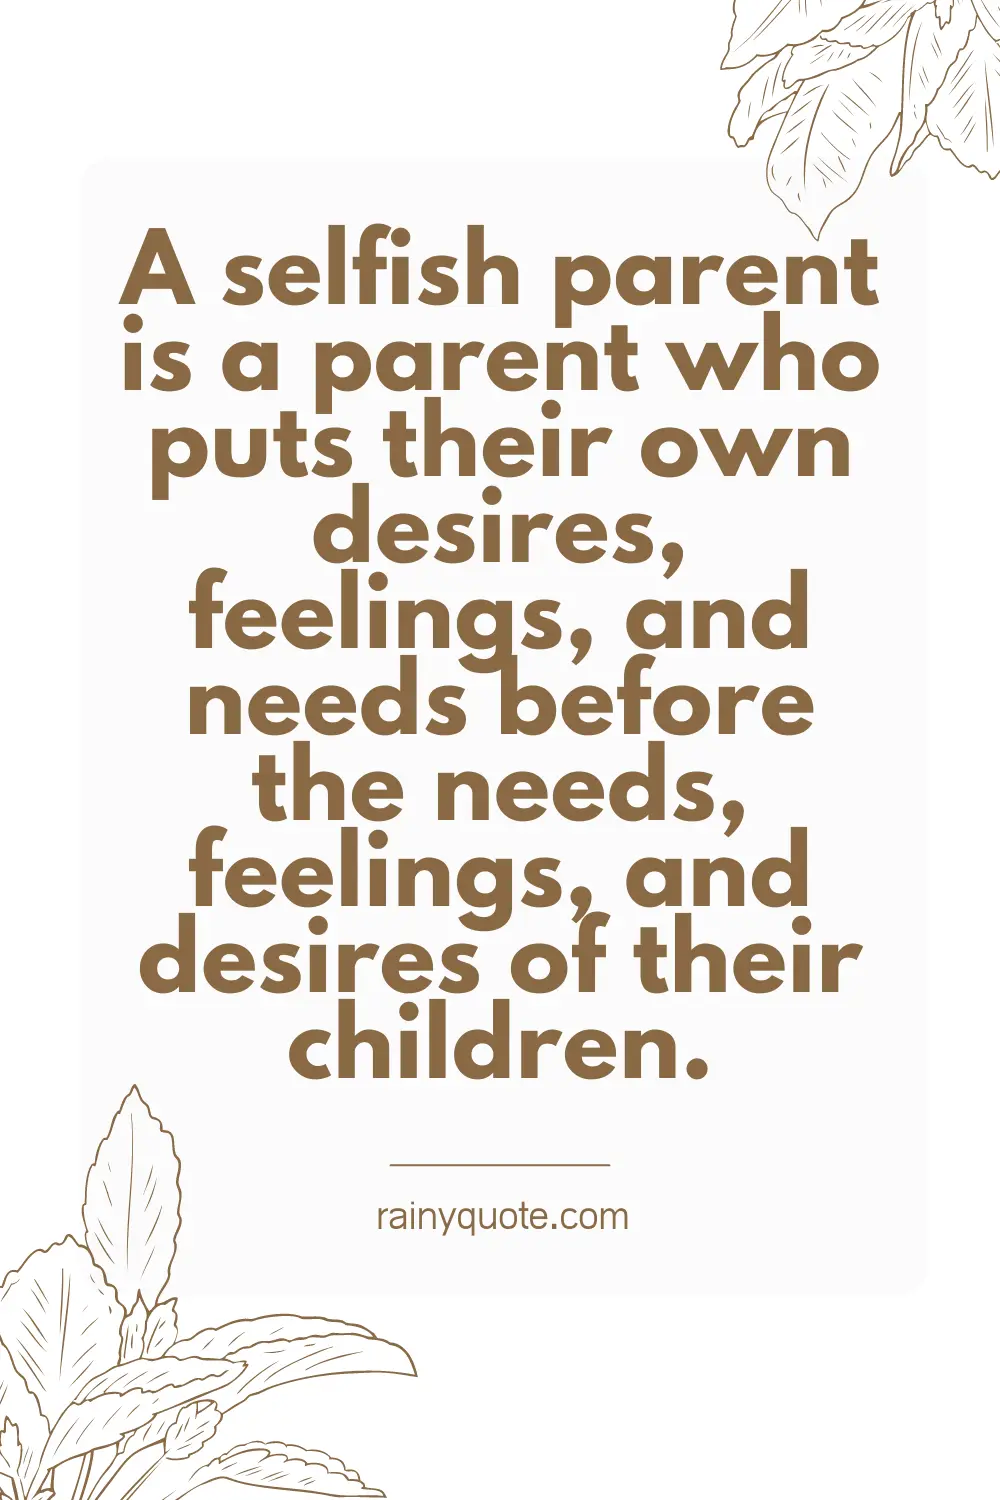 Dad Heartless Selfish Parents Quotes